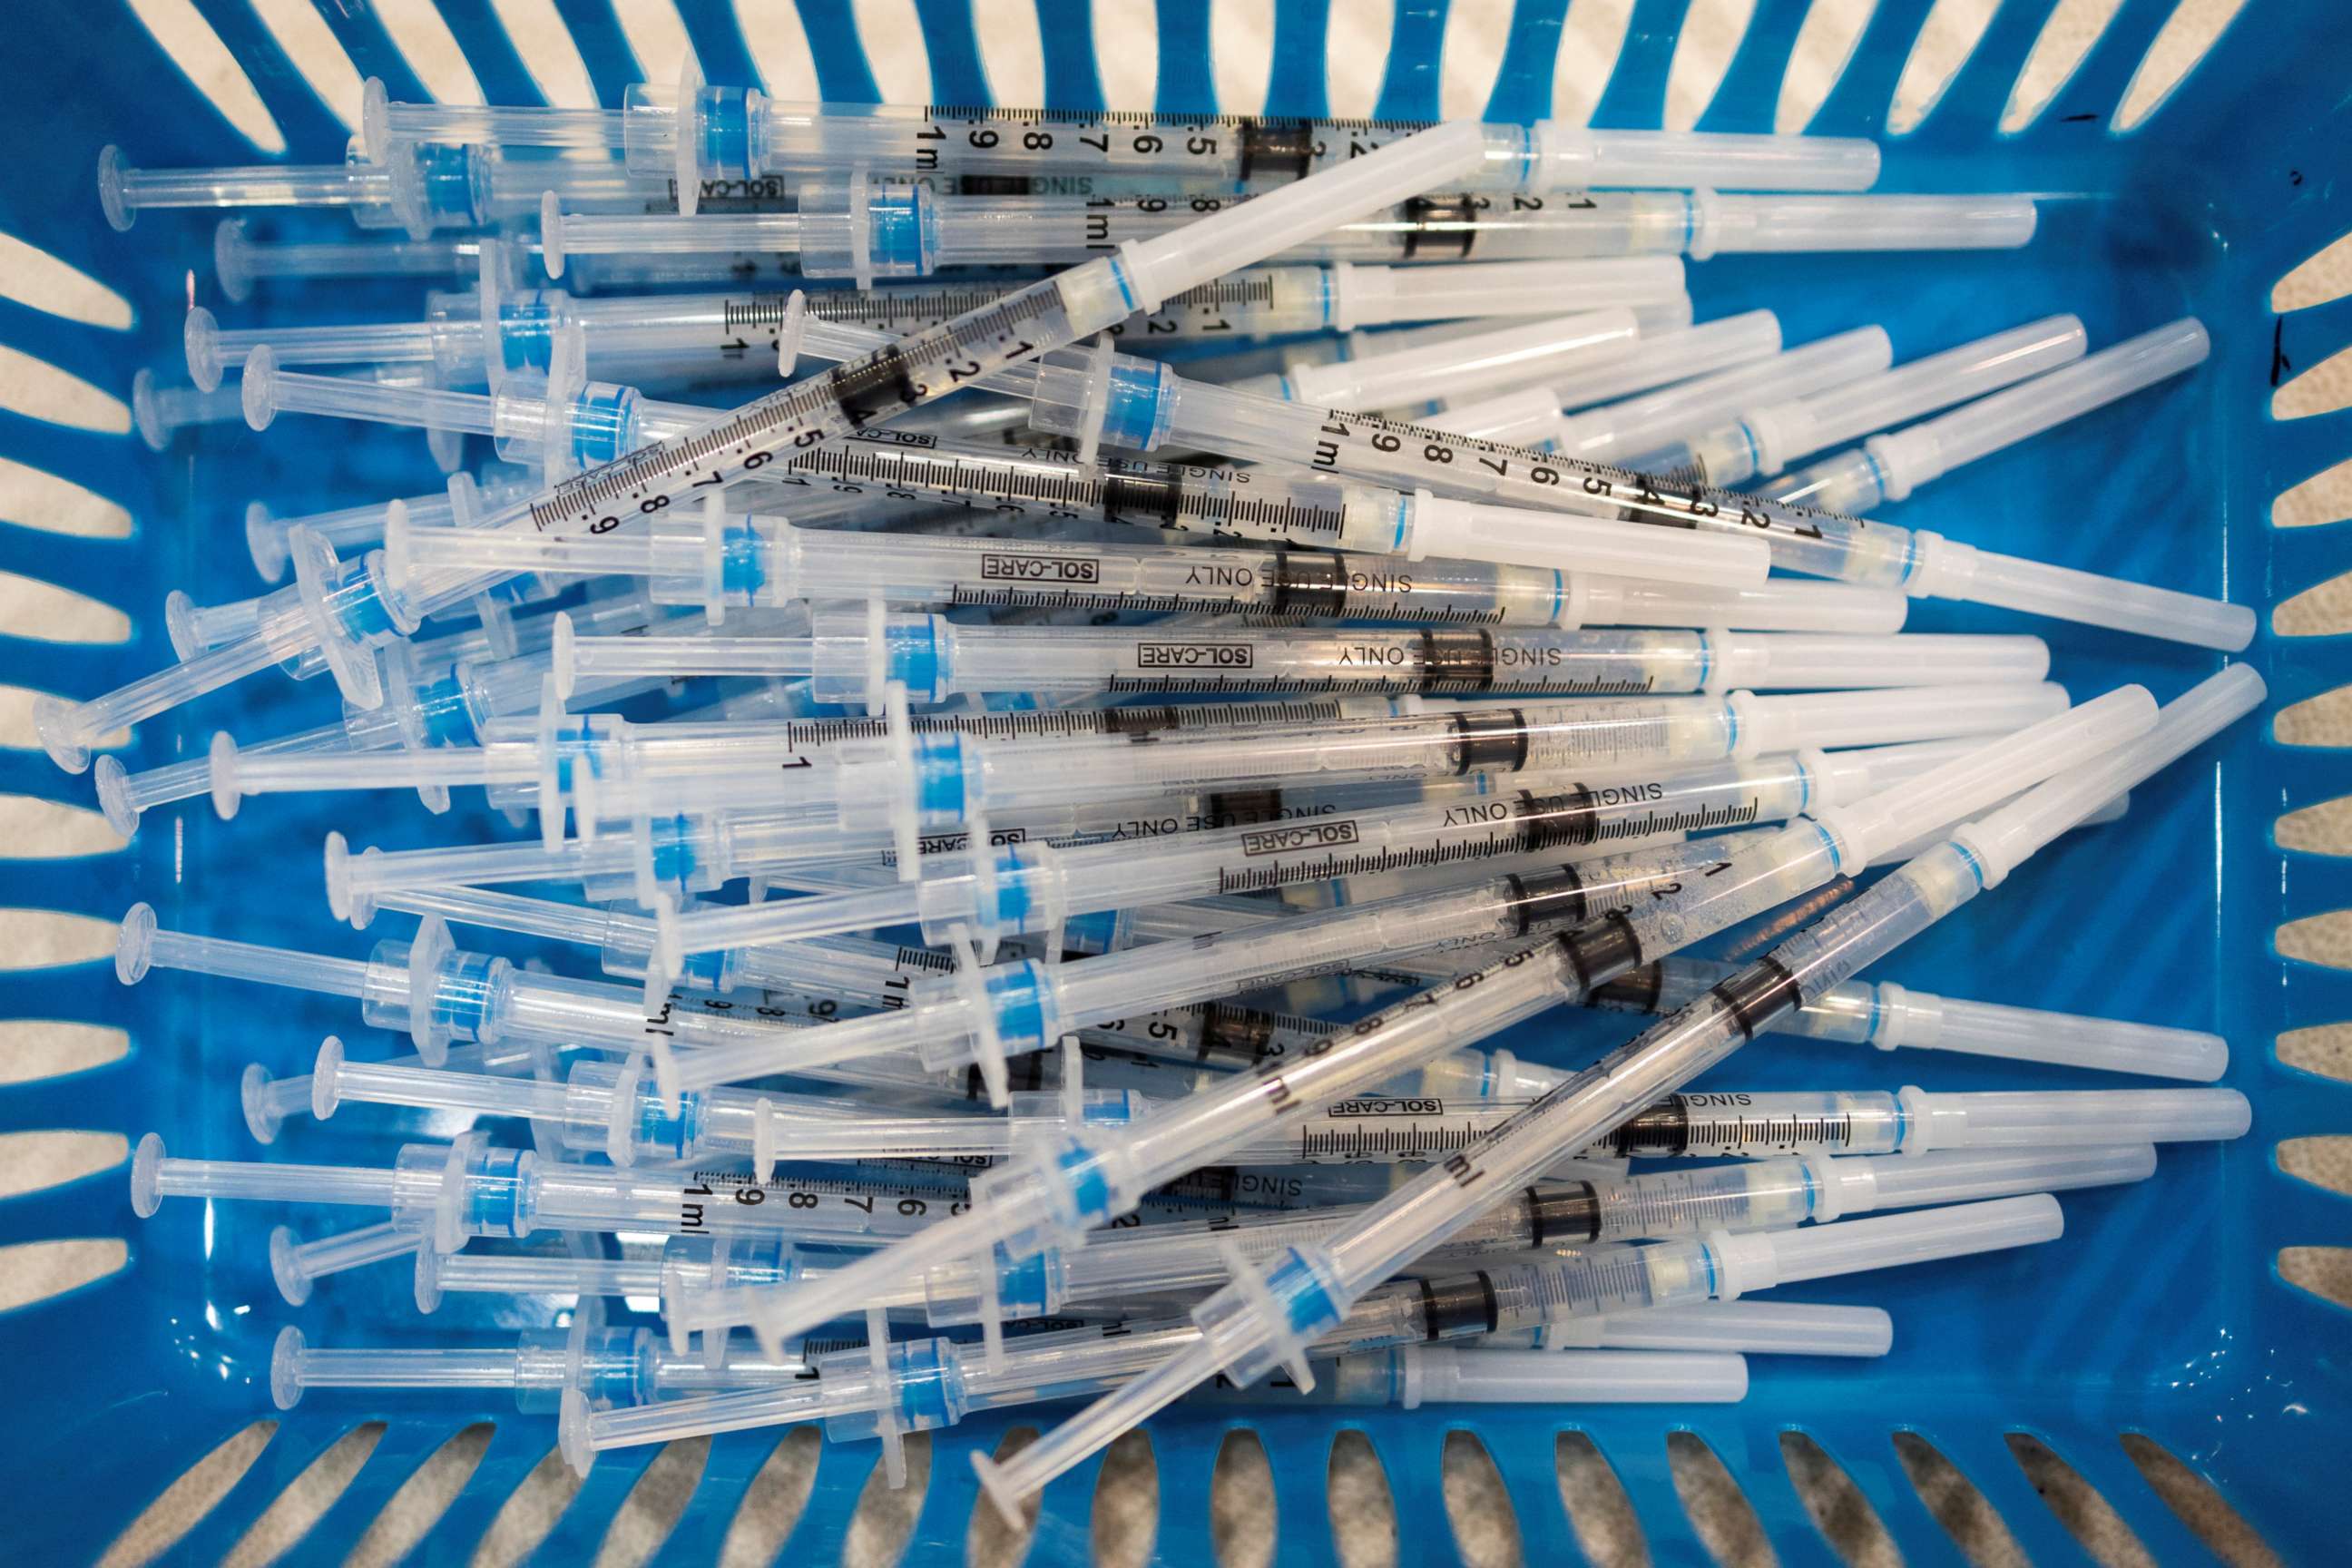 PHOTO: Doses of the Pfizer-BioNTech vaccine against COVID-19 are pictured at a booster clinic for 12- to 17-year-olds in Lansdale, Pa., Jan. 9, 2022.